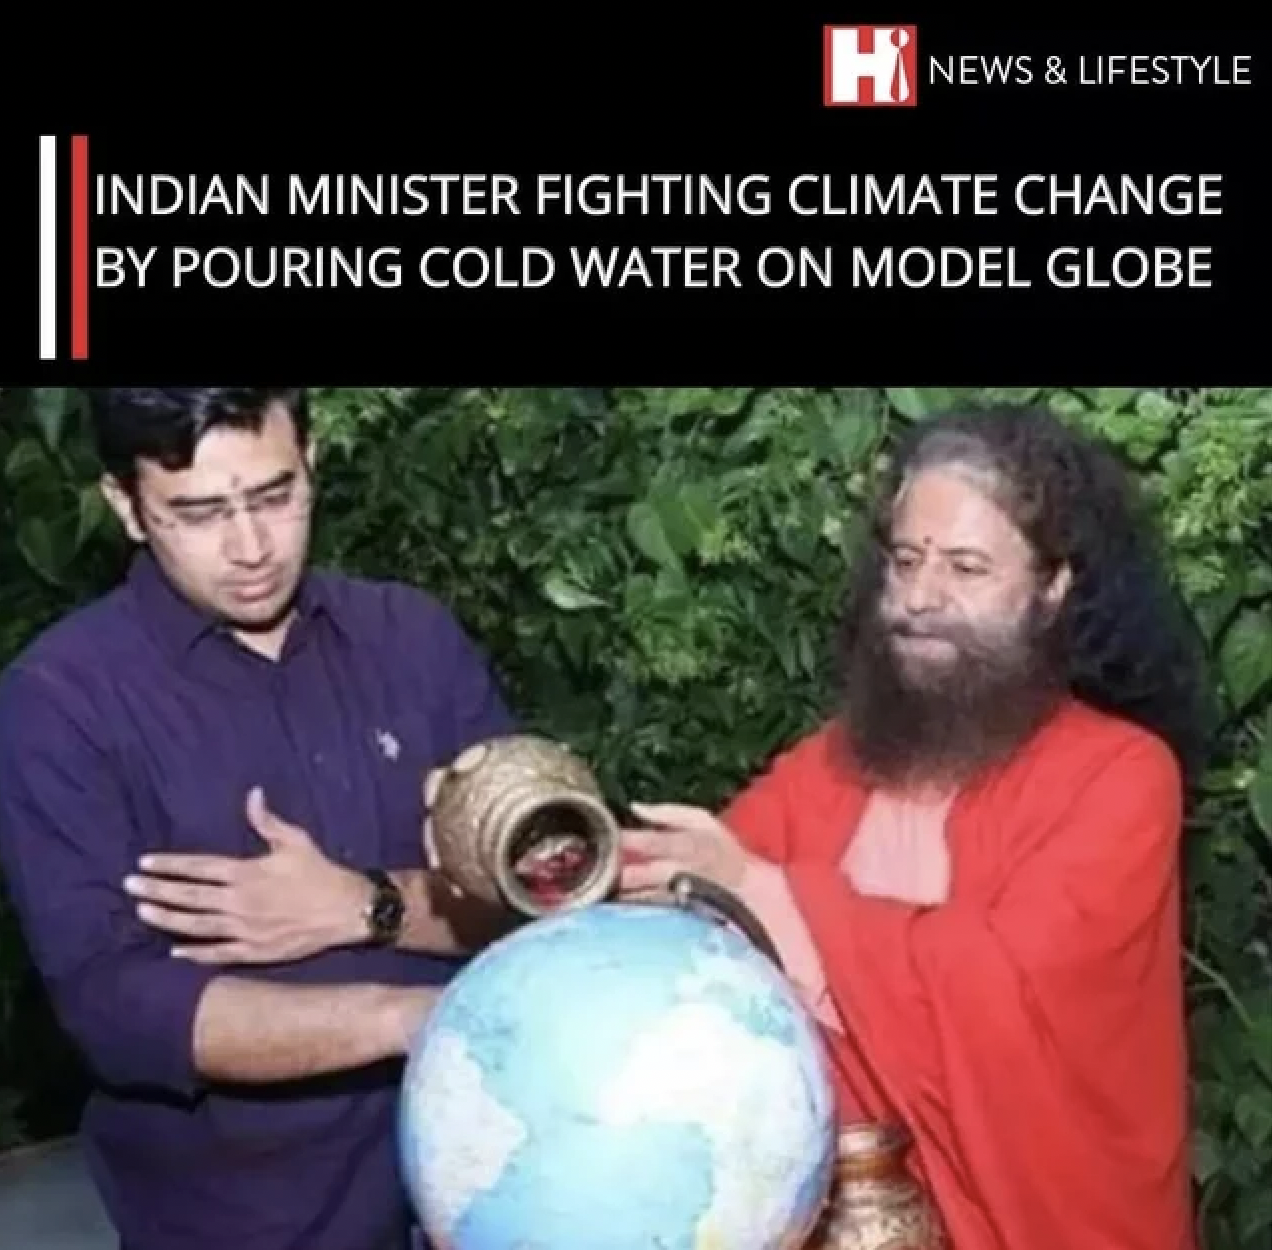 Hi News & Lifestyle Indian Minister Fighting Climate Change By Pouring Cold Water On Model Globe